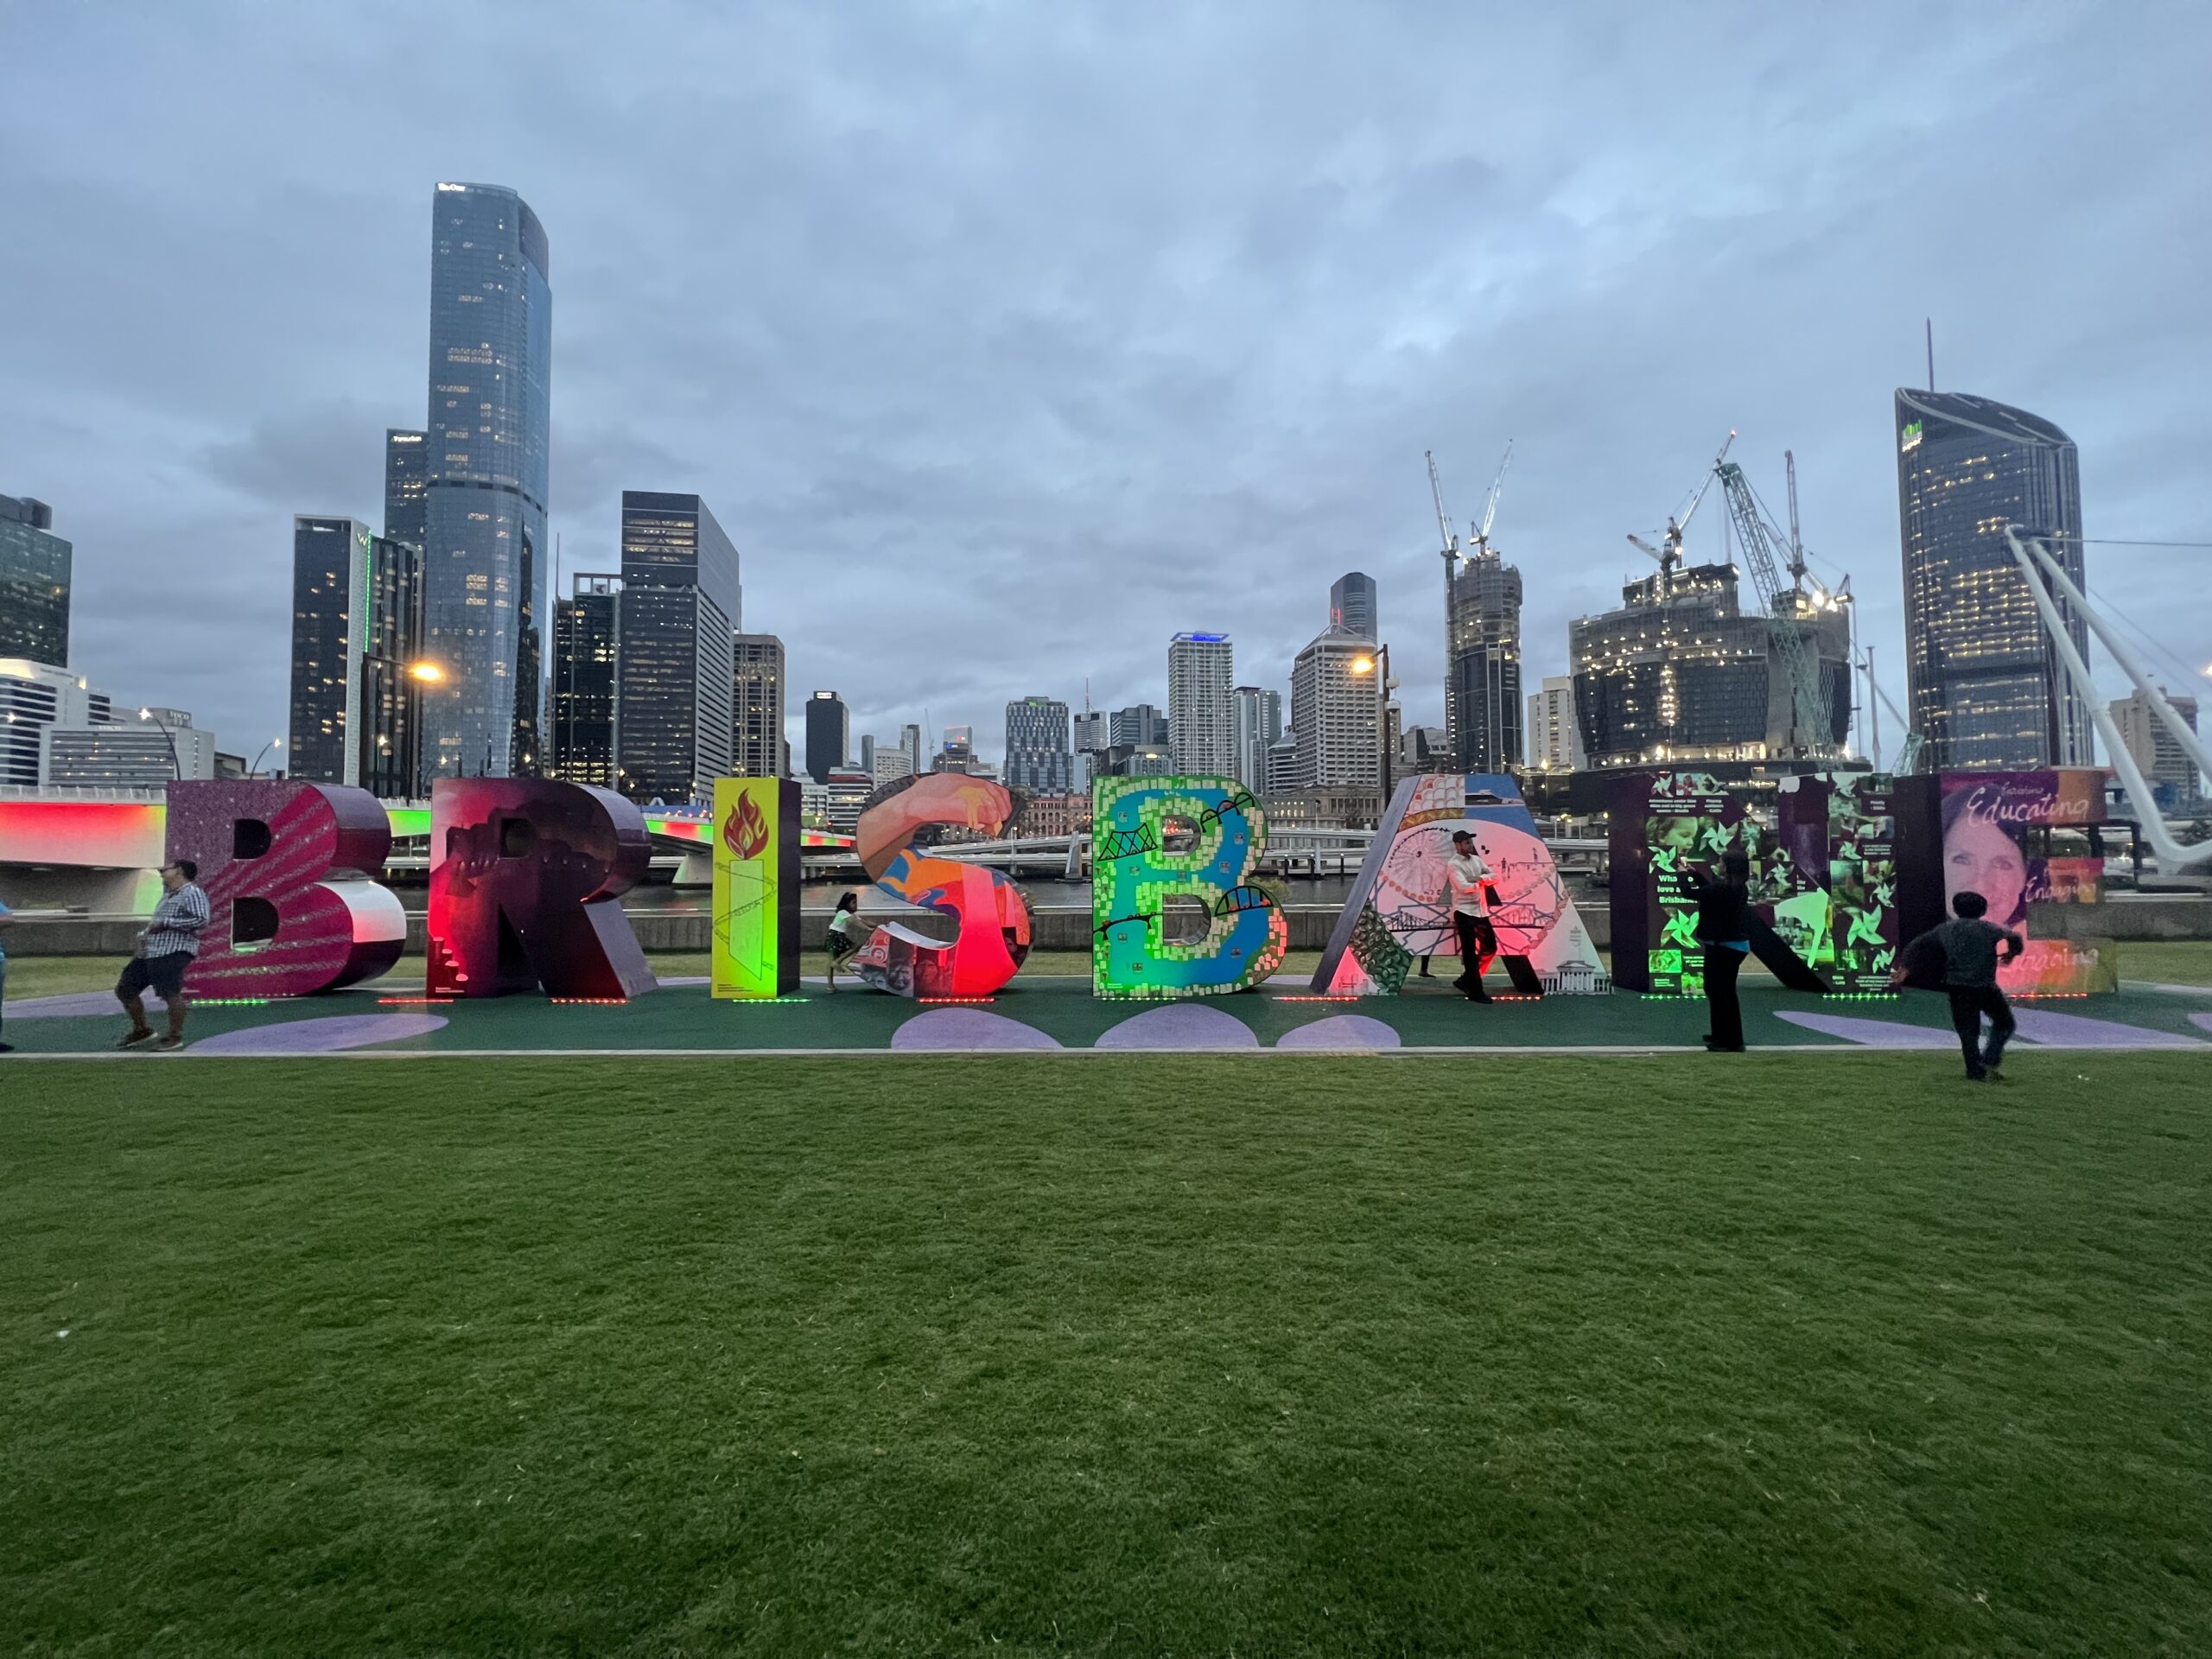 City Skyline with Brisbane letters on a lawn